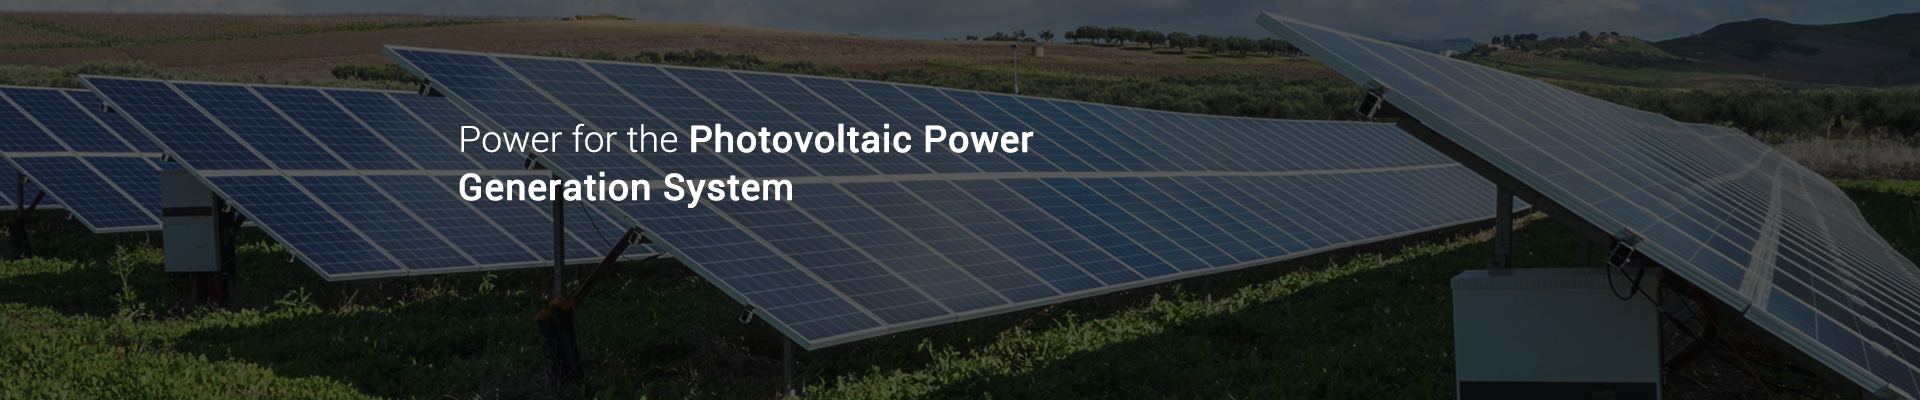 Power for the Photovoltaic Power Generation System